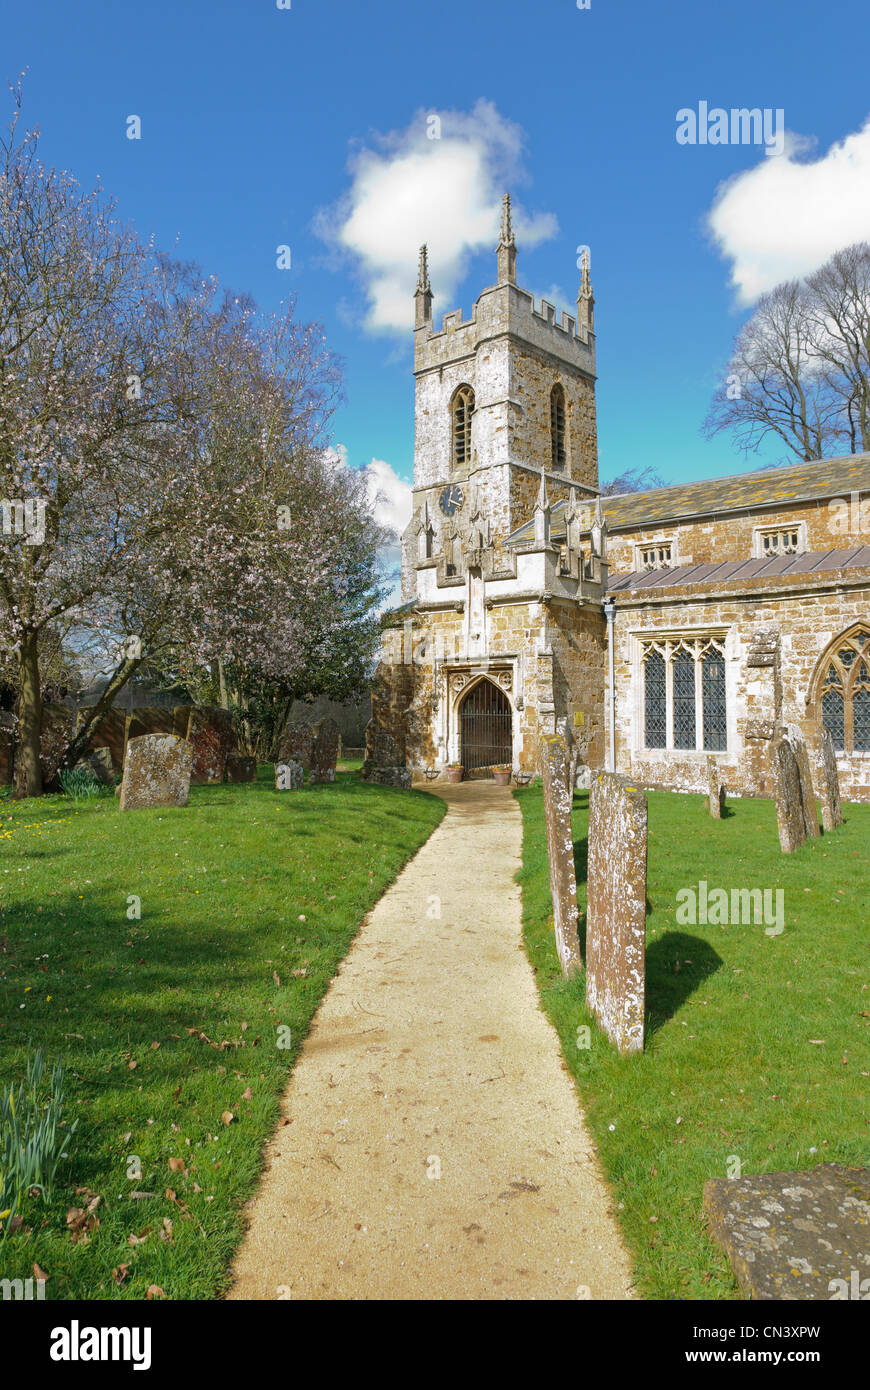 The Church of 'St Peter ad Vincula' at Newington, Oxfordshire, England. Stock Photo